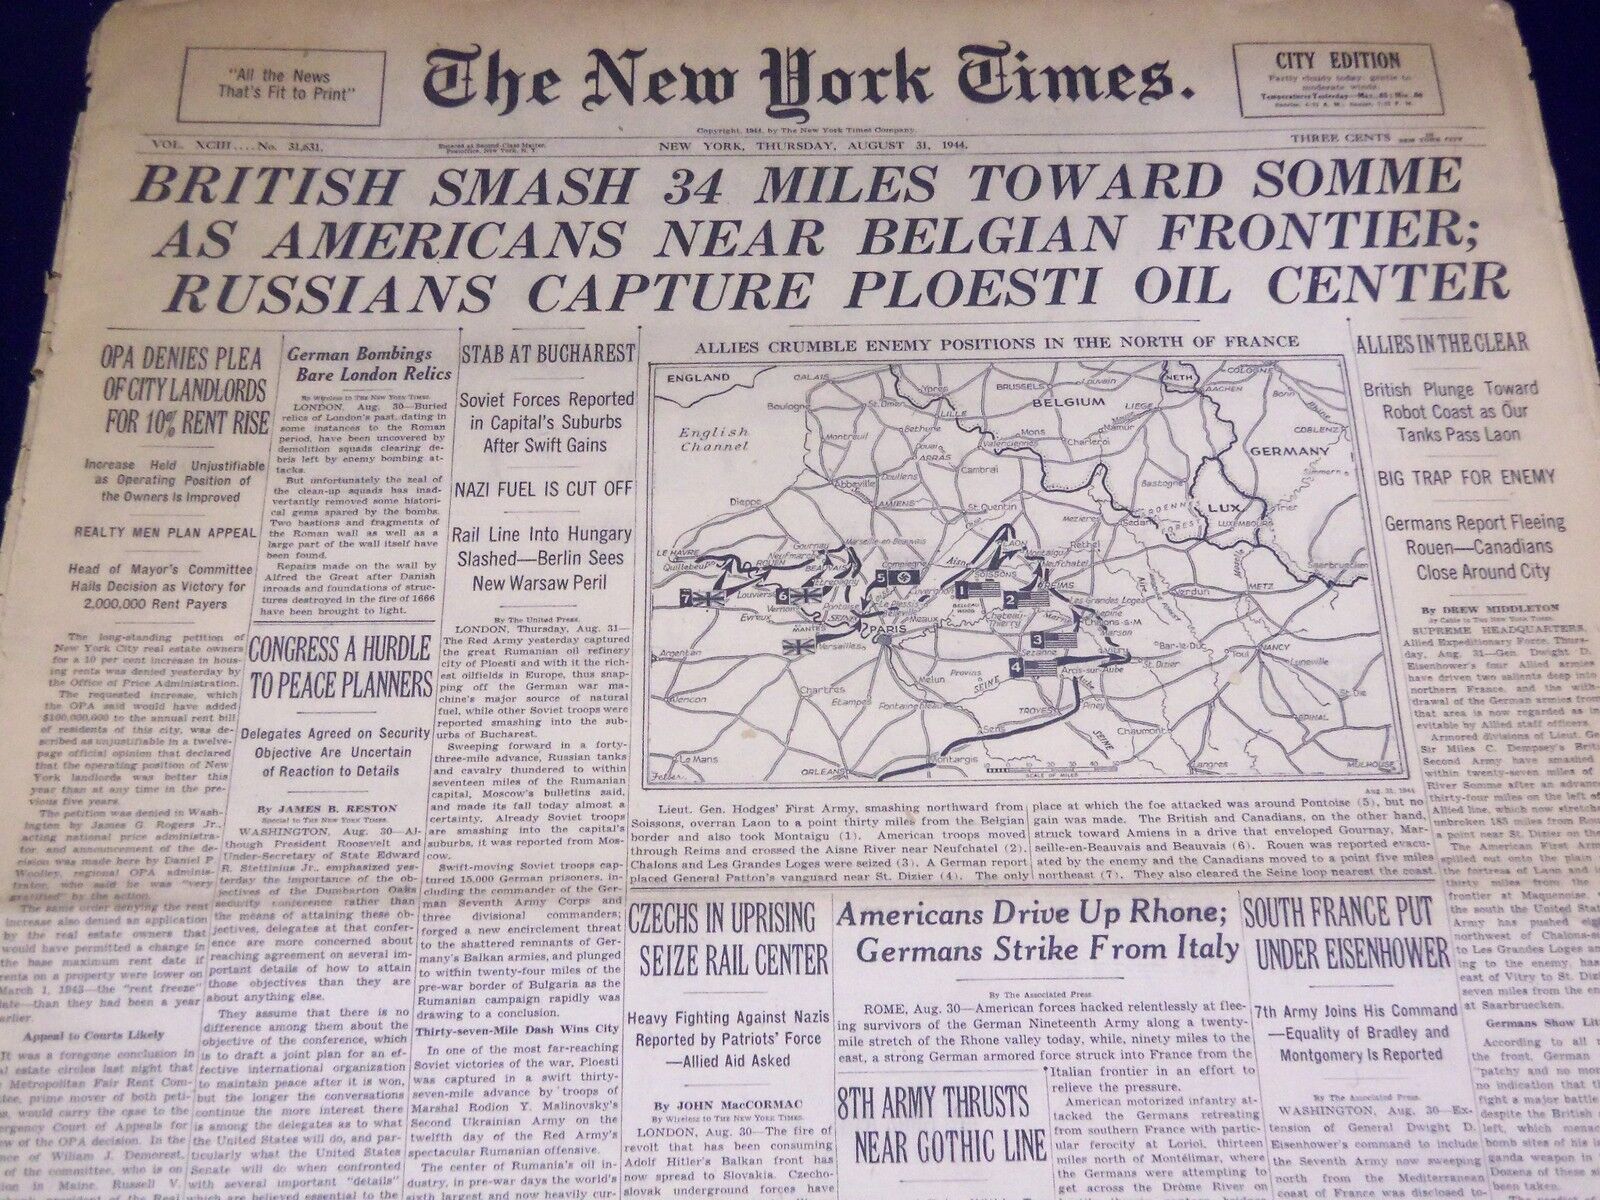 1944 AUGUST 31 NEW YORK TIMES - BRITISH SMASH TOWARD SOMME - NT 2380